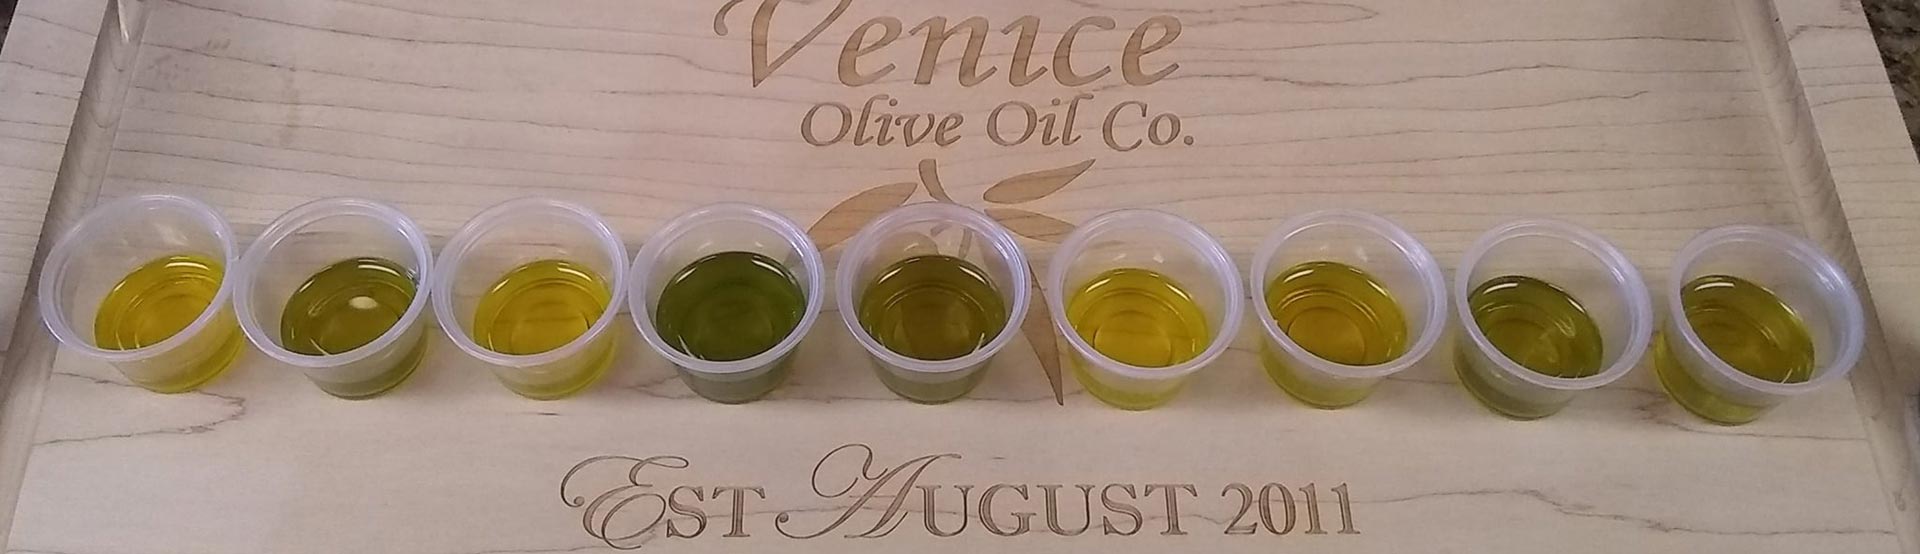 small tasting cups filled with olive oil on a Venice Olive Oil cutting board